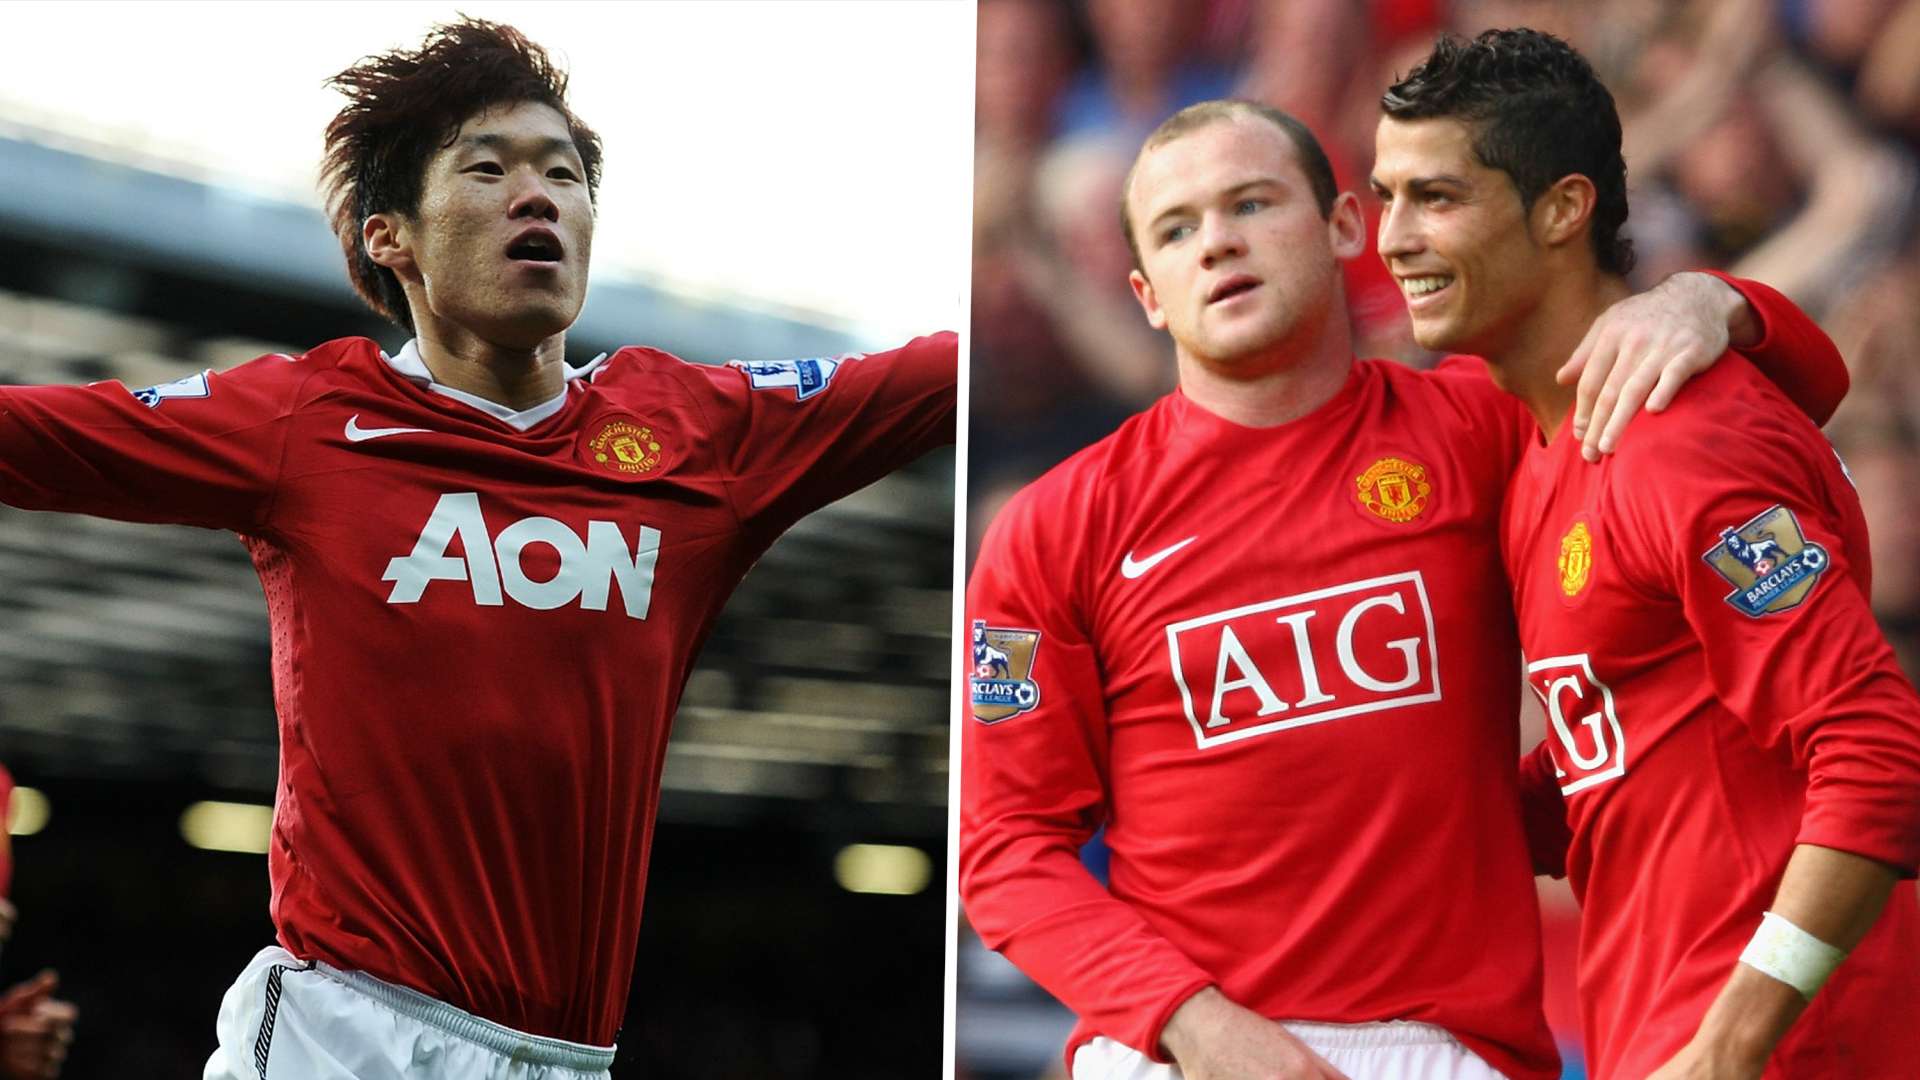 Park just as important to Man Utd as Cristiano Ronaldo, Rooney claims